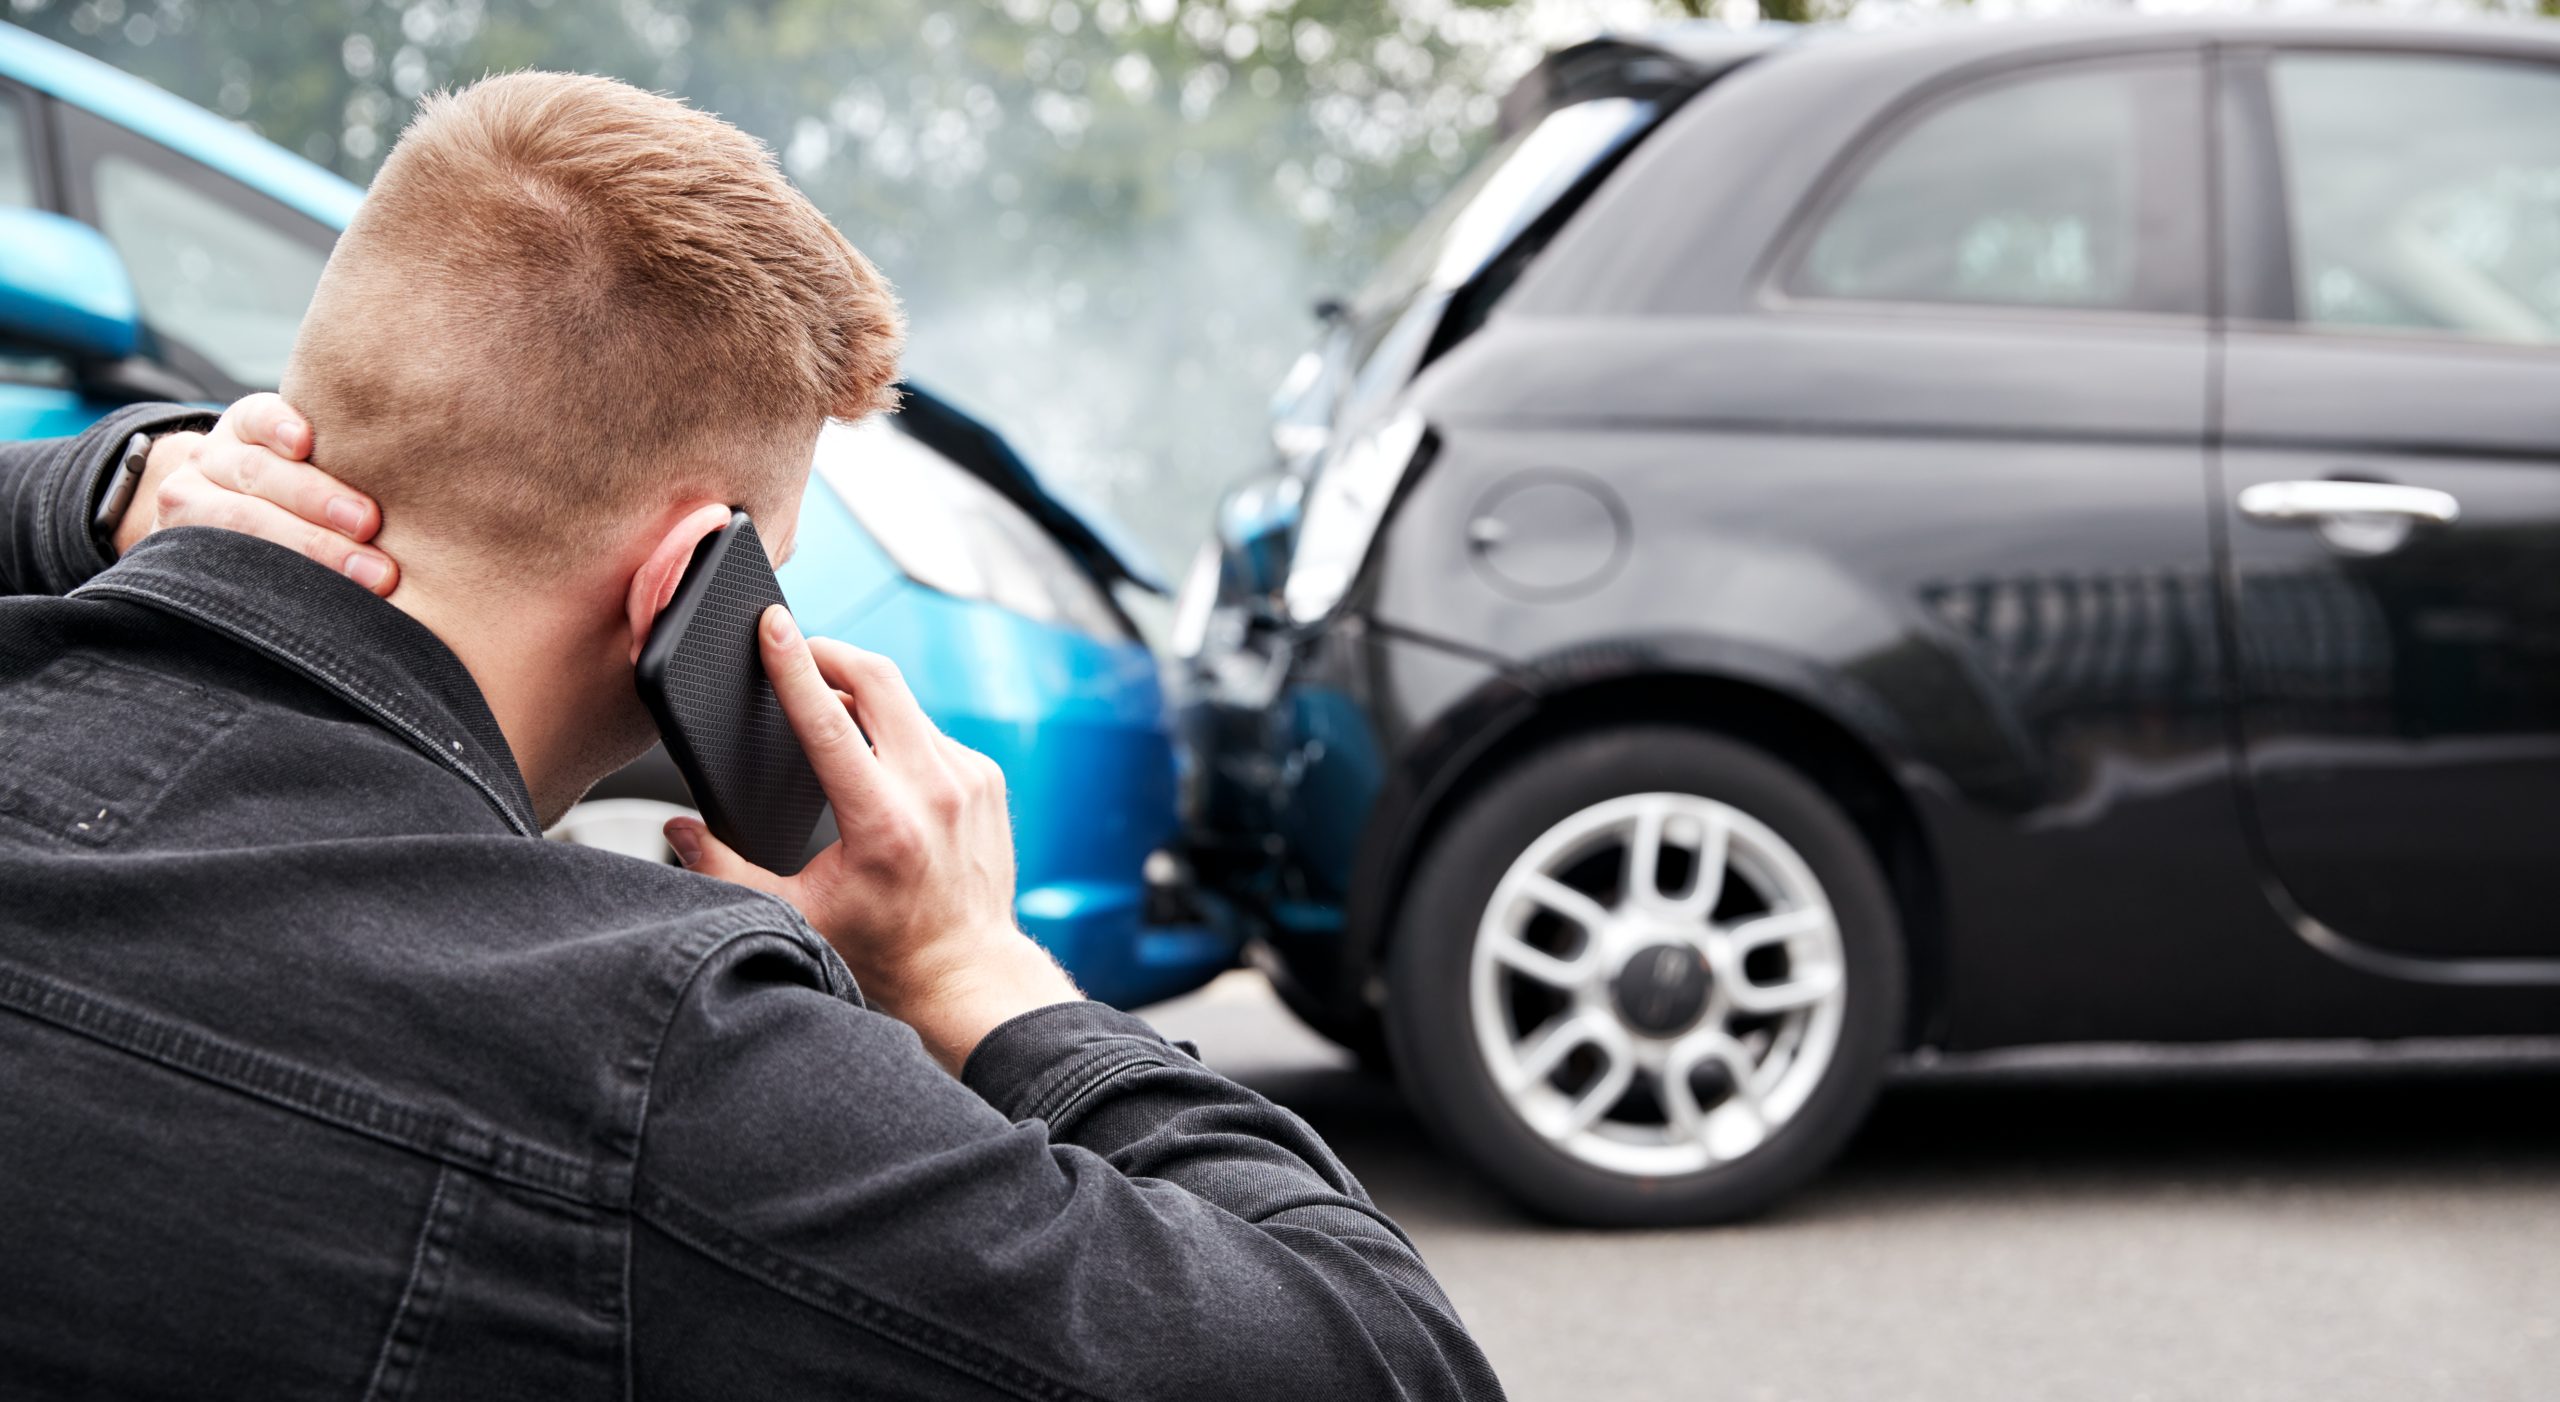 Injured man on the phone after a car accident.